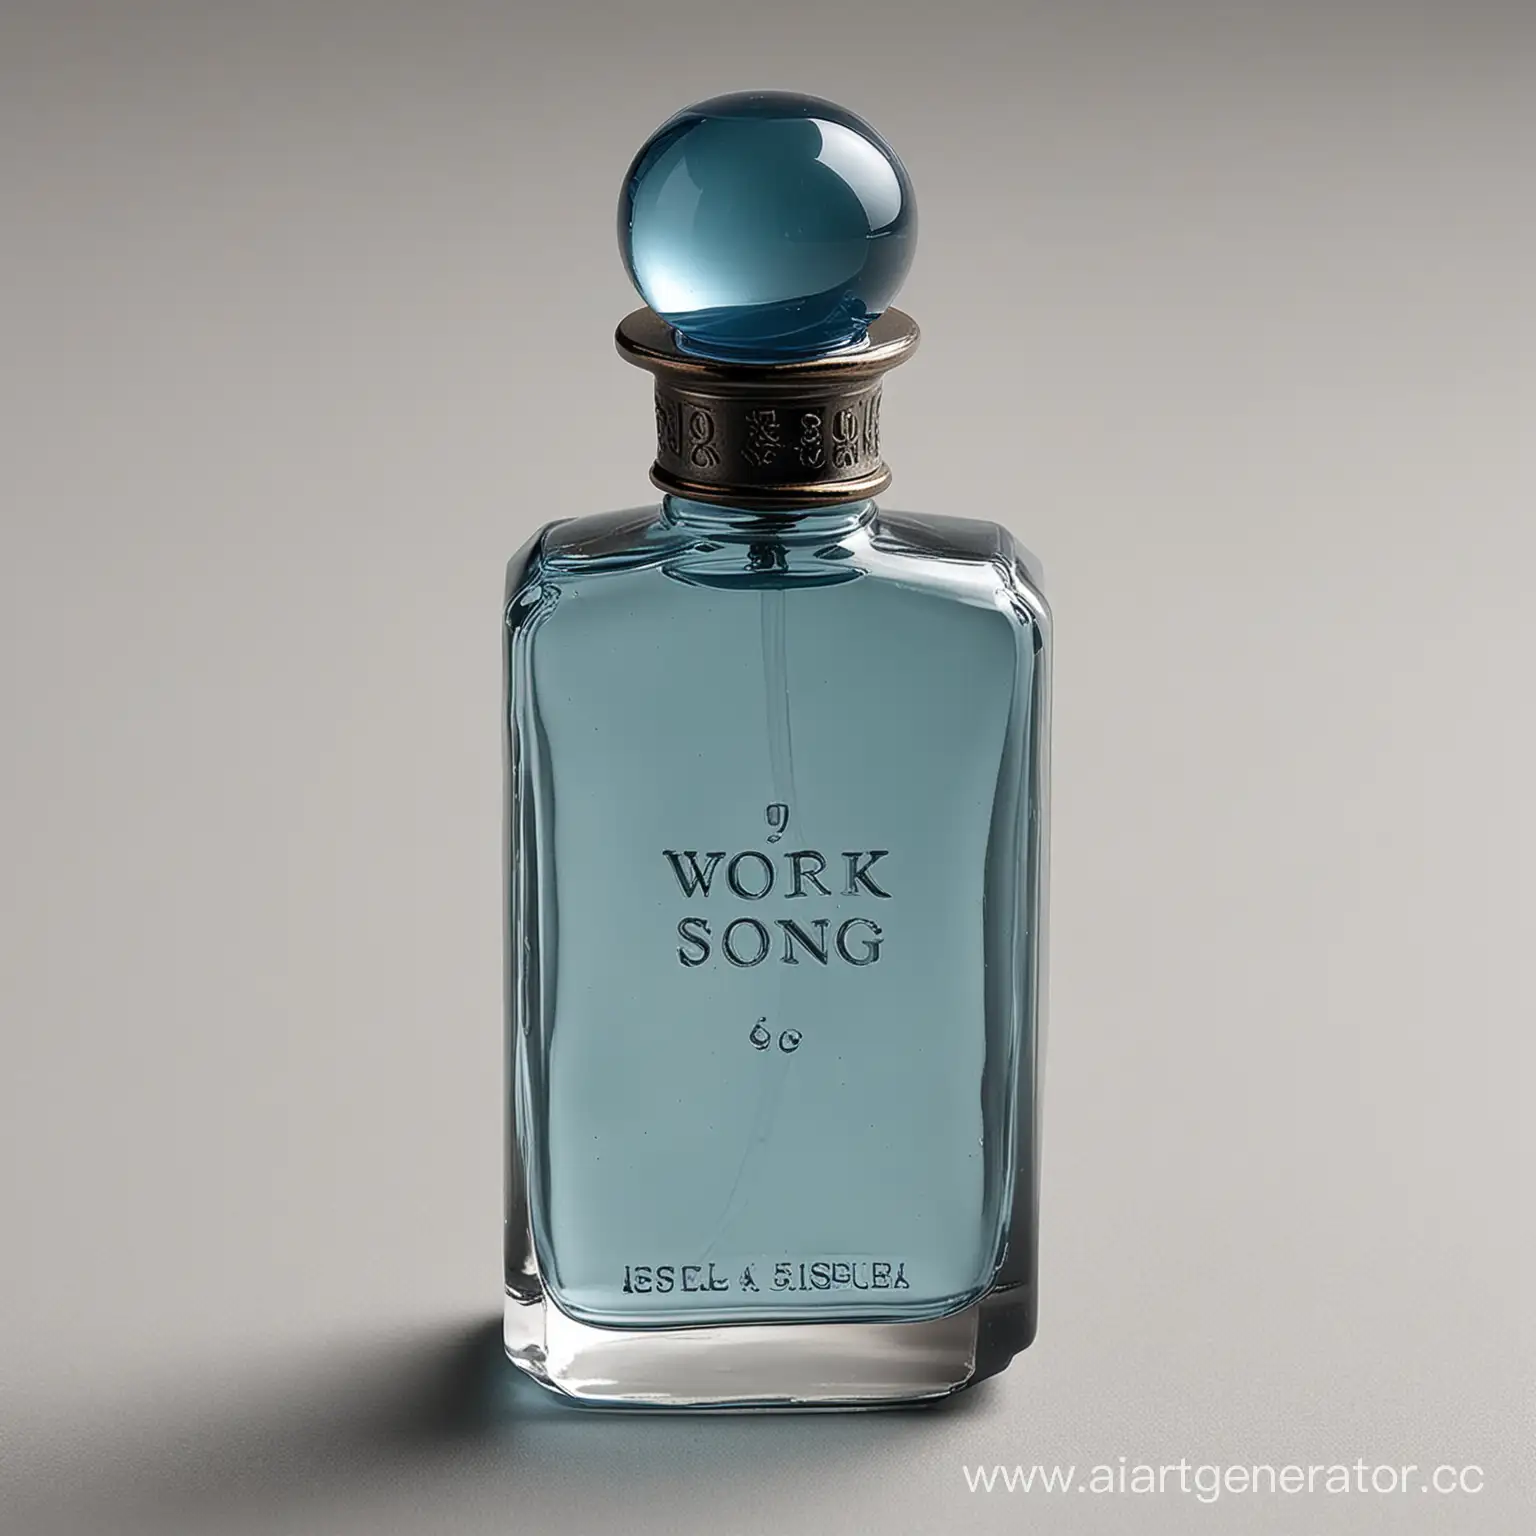 BlueGray-Perfume-Bottle-with-Work-Song-Inscription